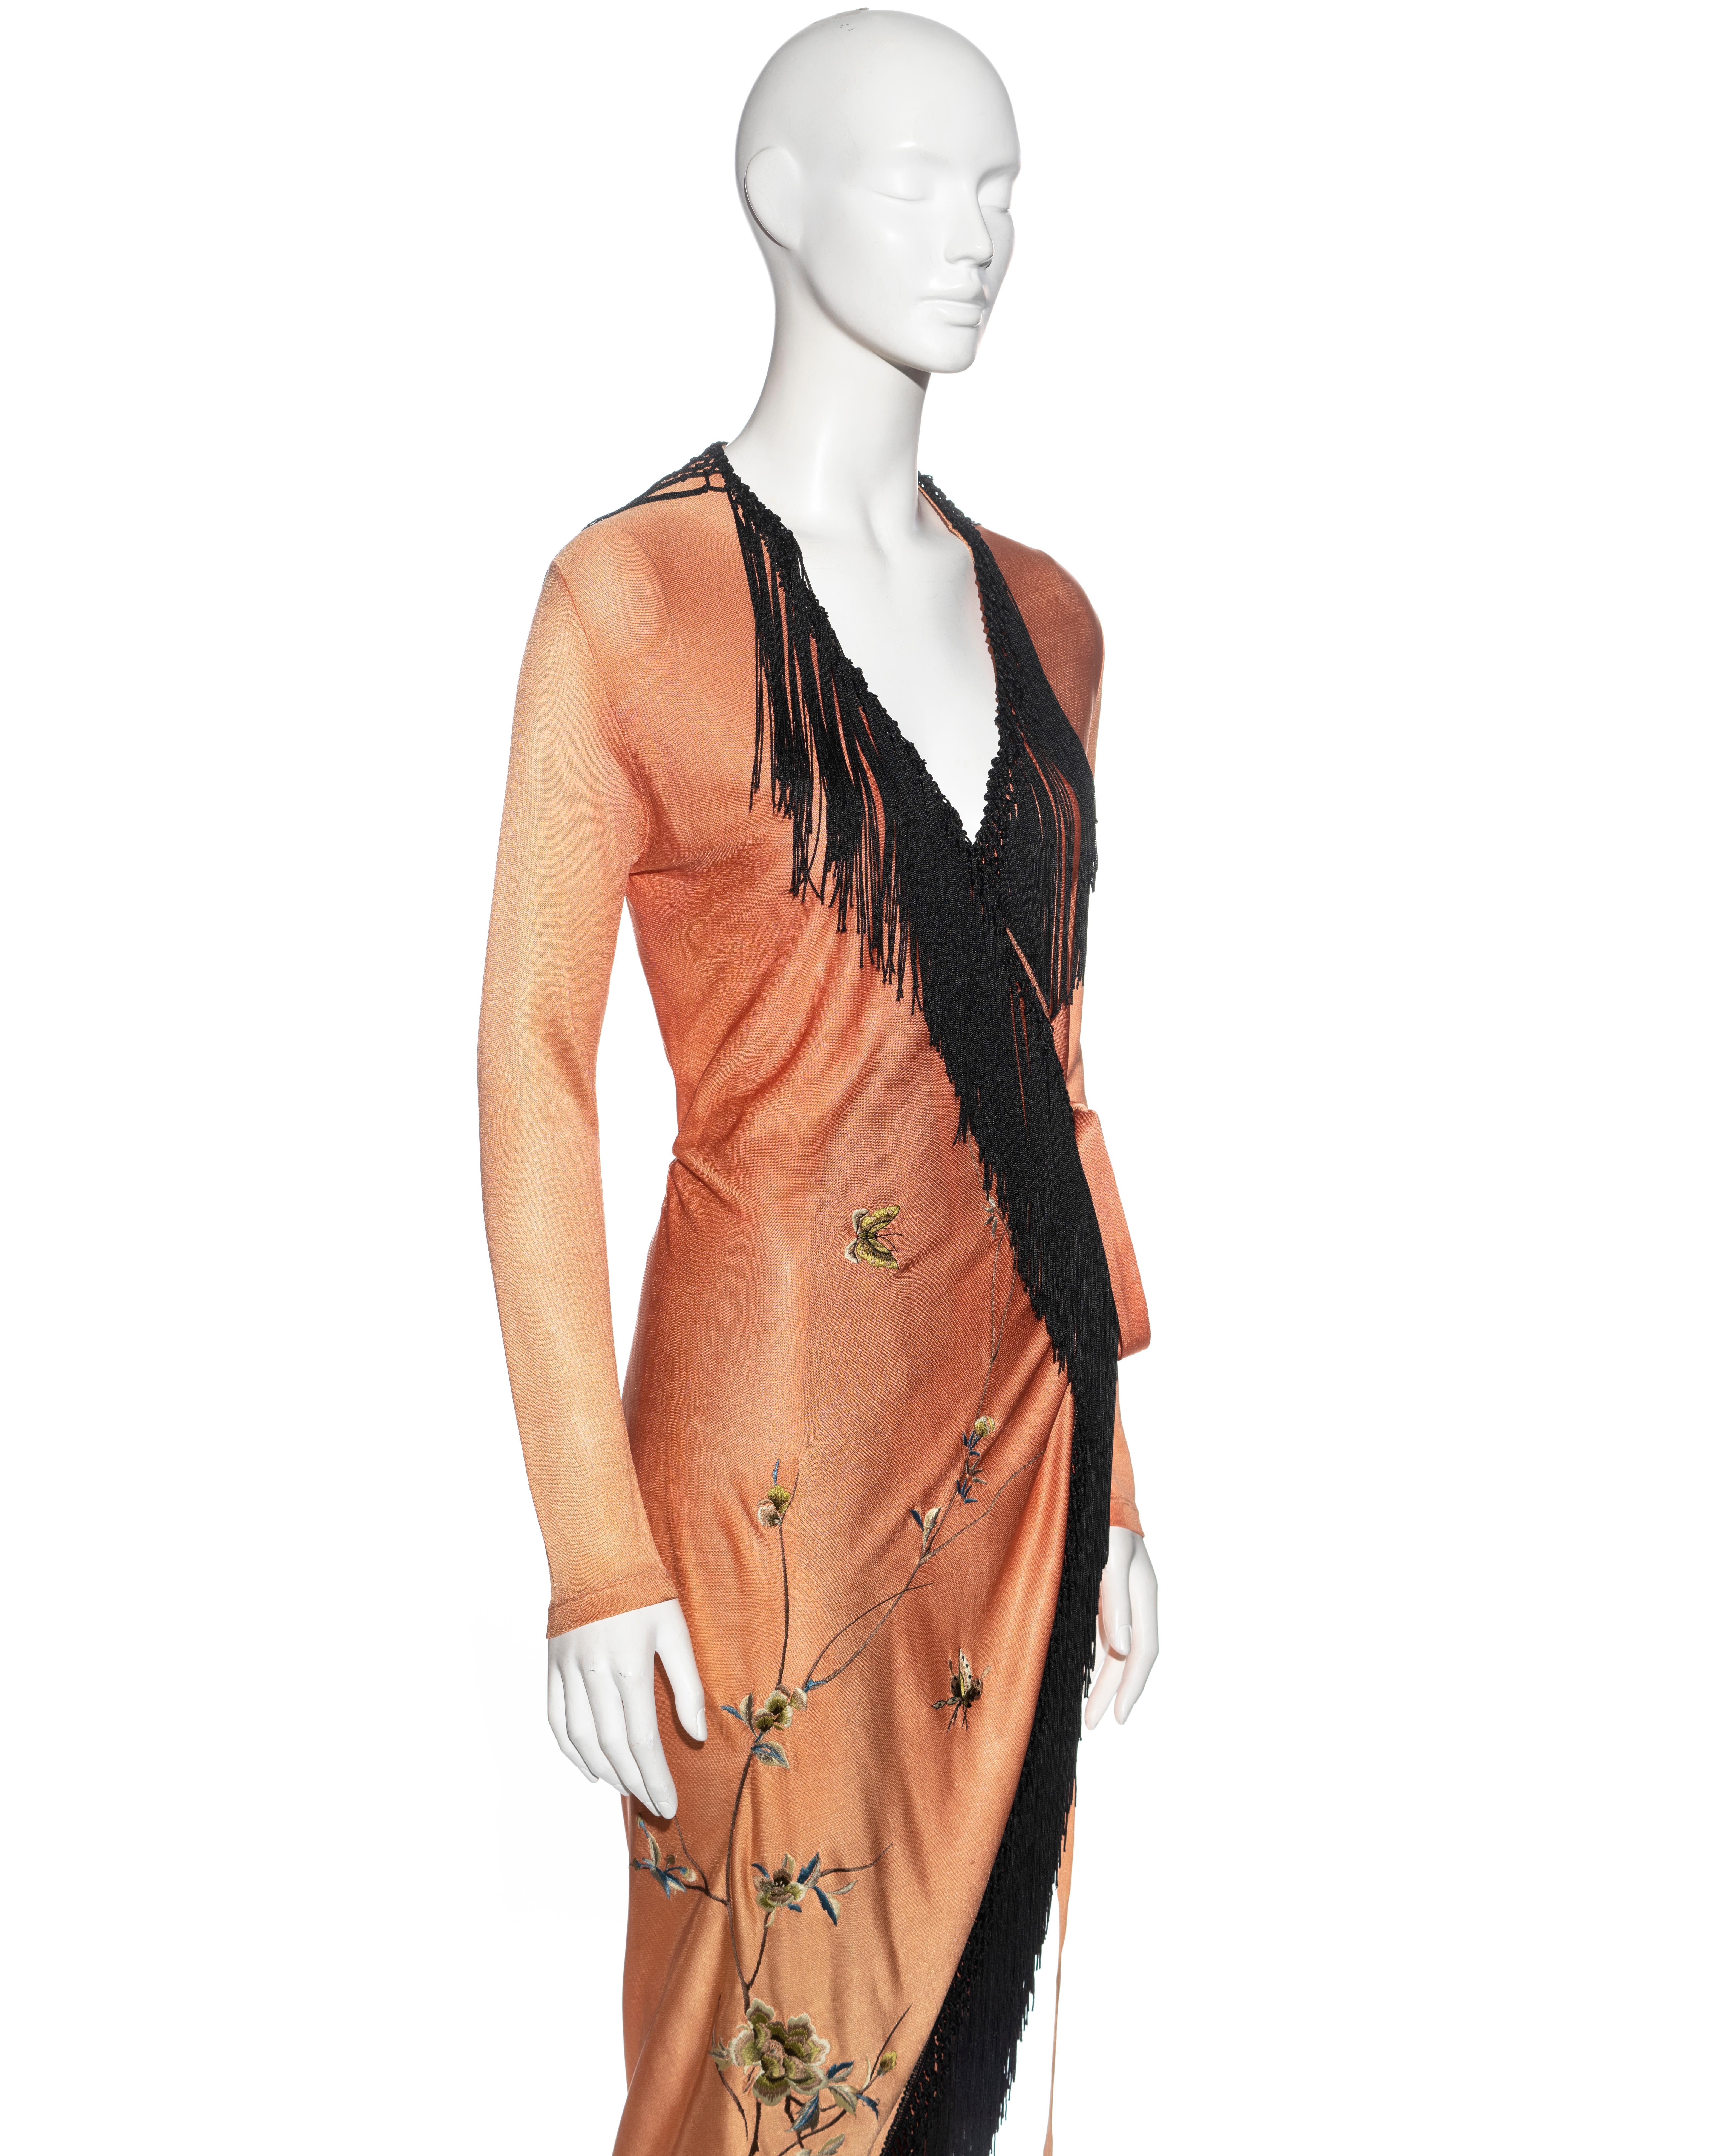 Jean Paul Gaultier pale peach wrap dress with floral embroidery, c. 1991-1994 1